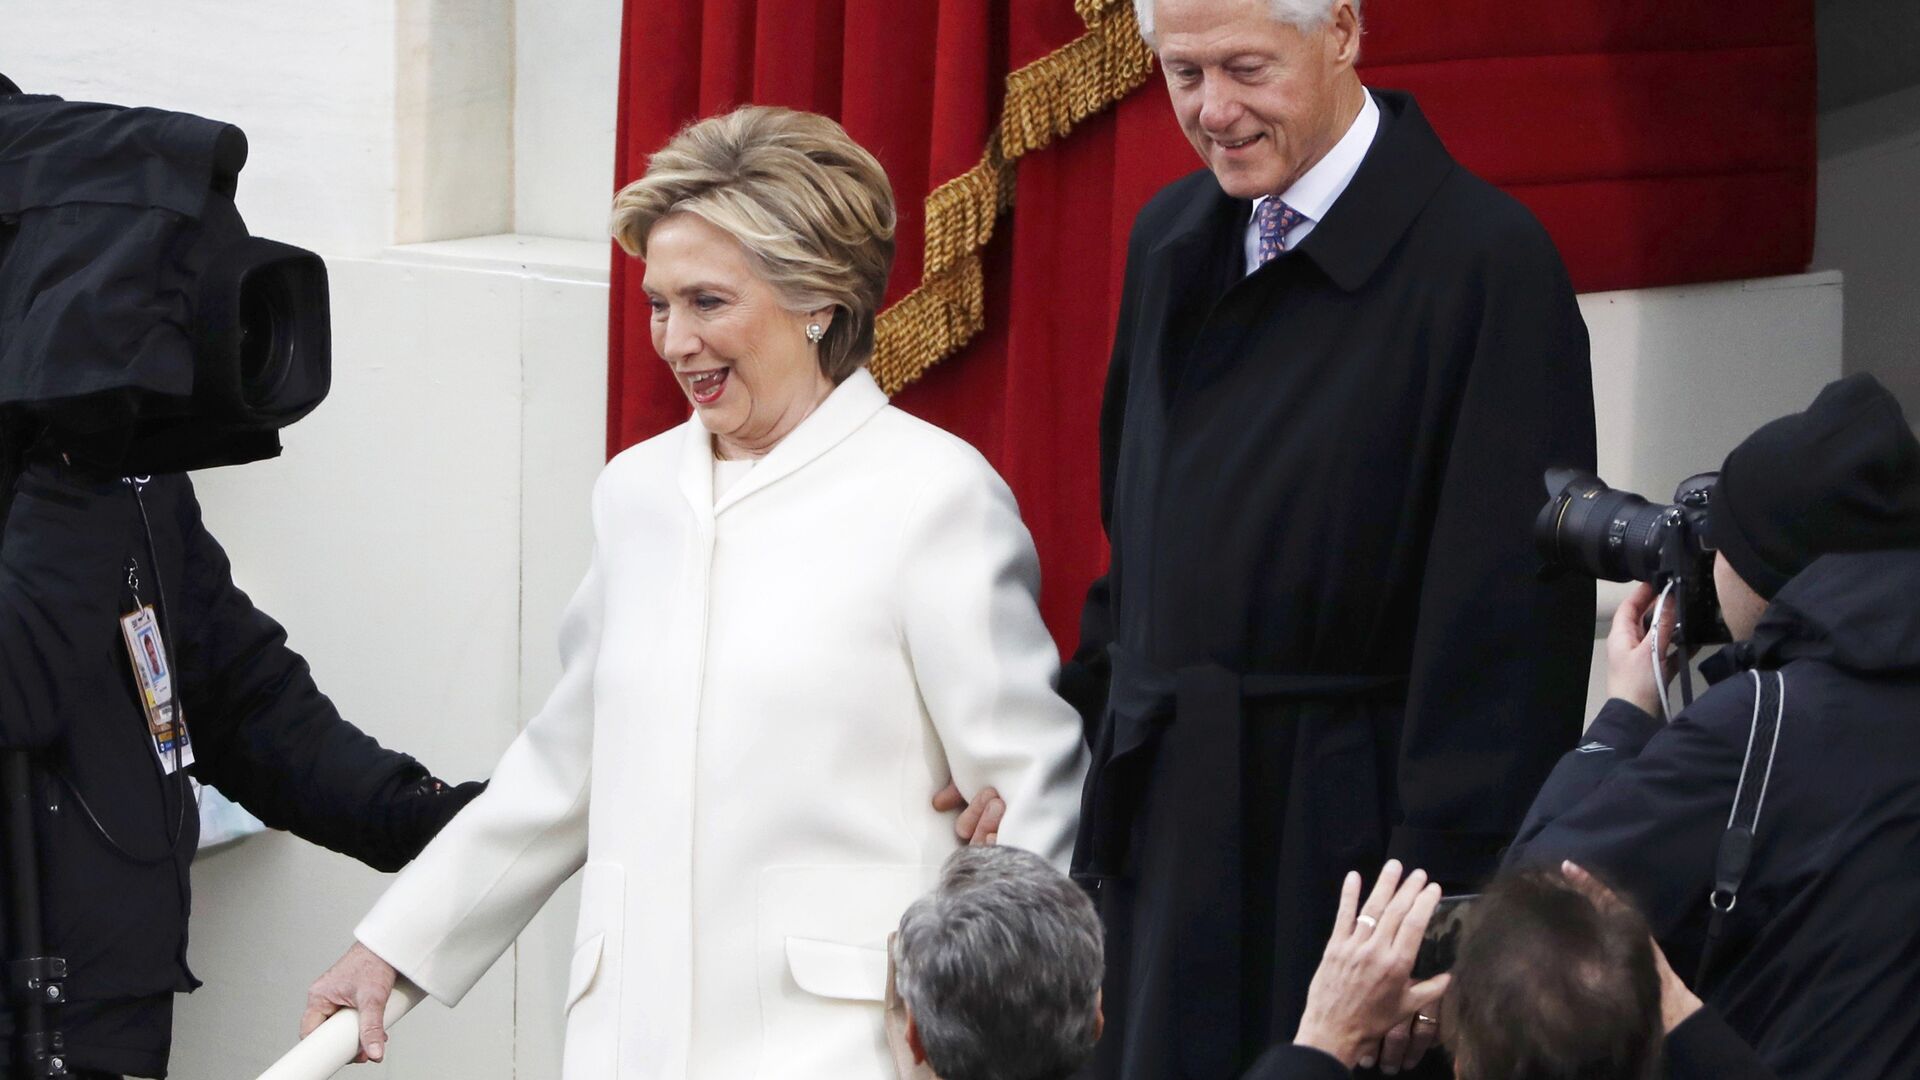 2016 Democratic presidential nominee and former Secretary of State Hillary Clinton (L) arrives with her husband, former president Bill Clinton, for the inauguration ceremonies swearing in Donald Trump as the 45th president of the United States on the West front of the US Capitol in Washington, US, 20 January  2017 - Sputnik International, 1920, 15.02.2021